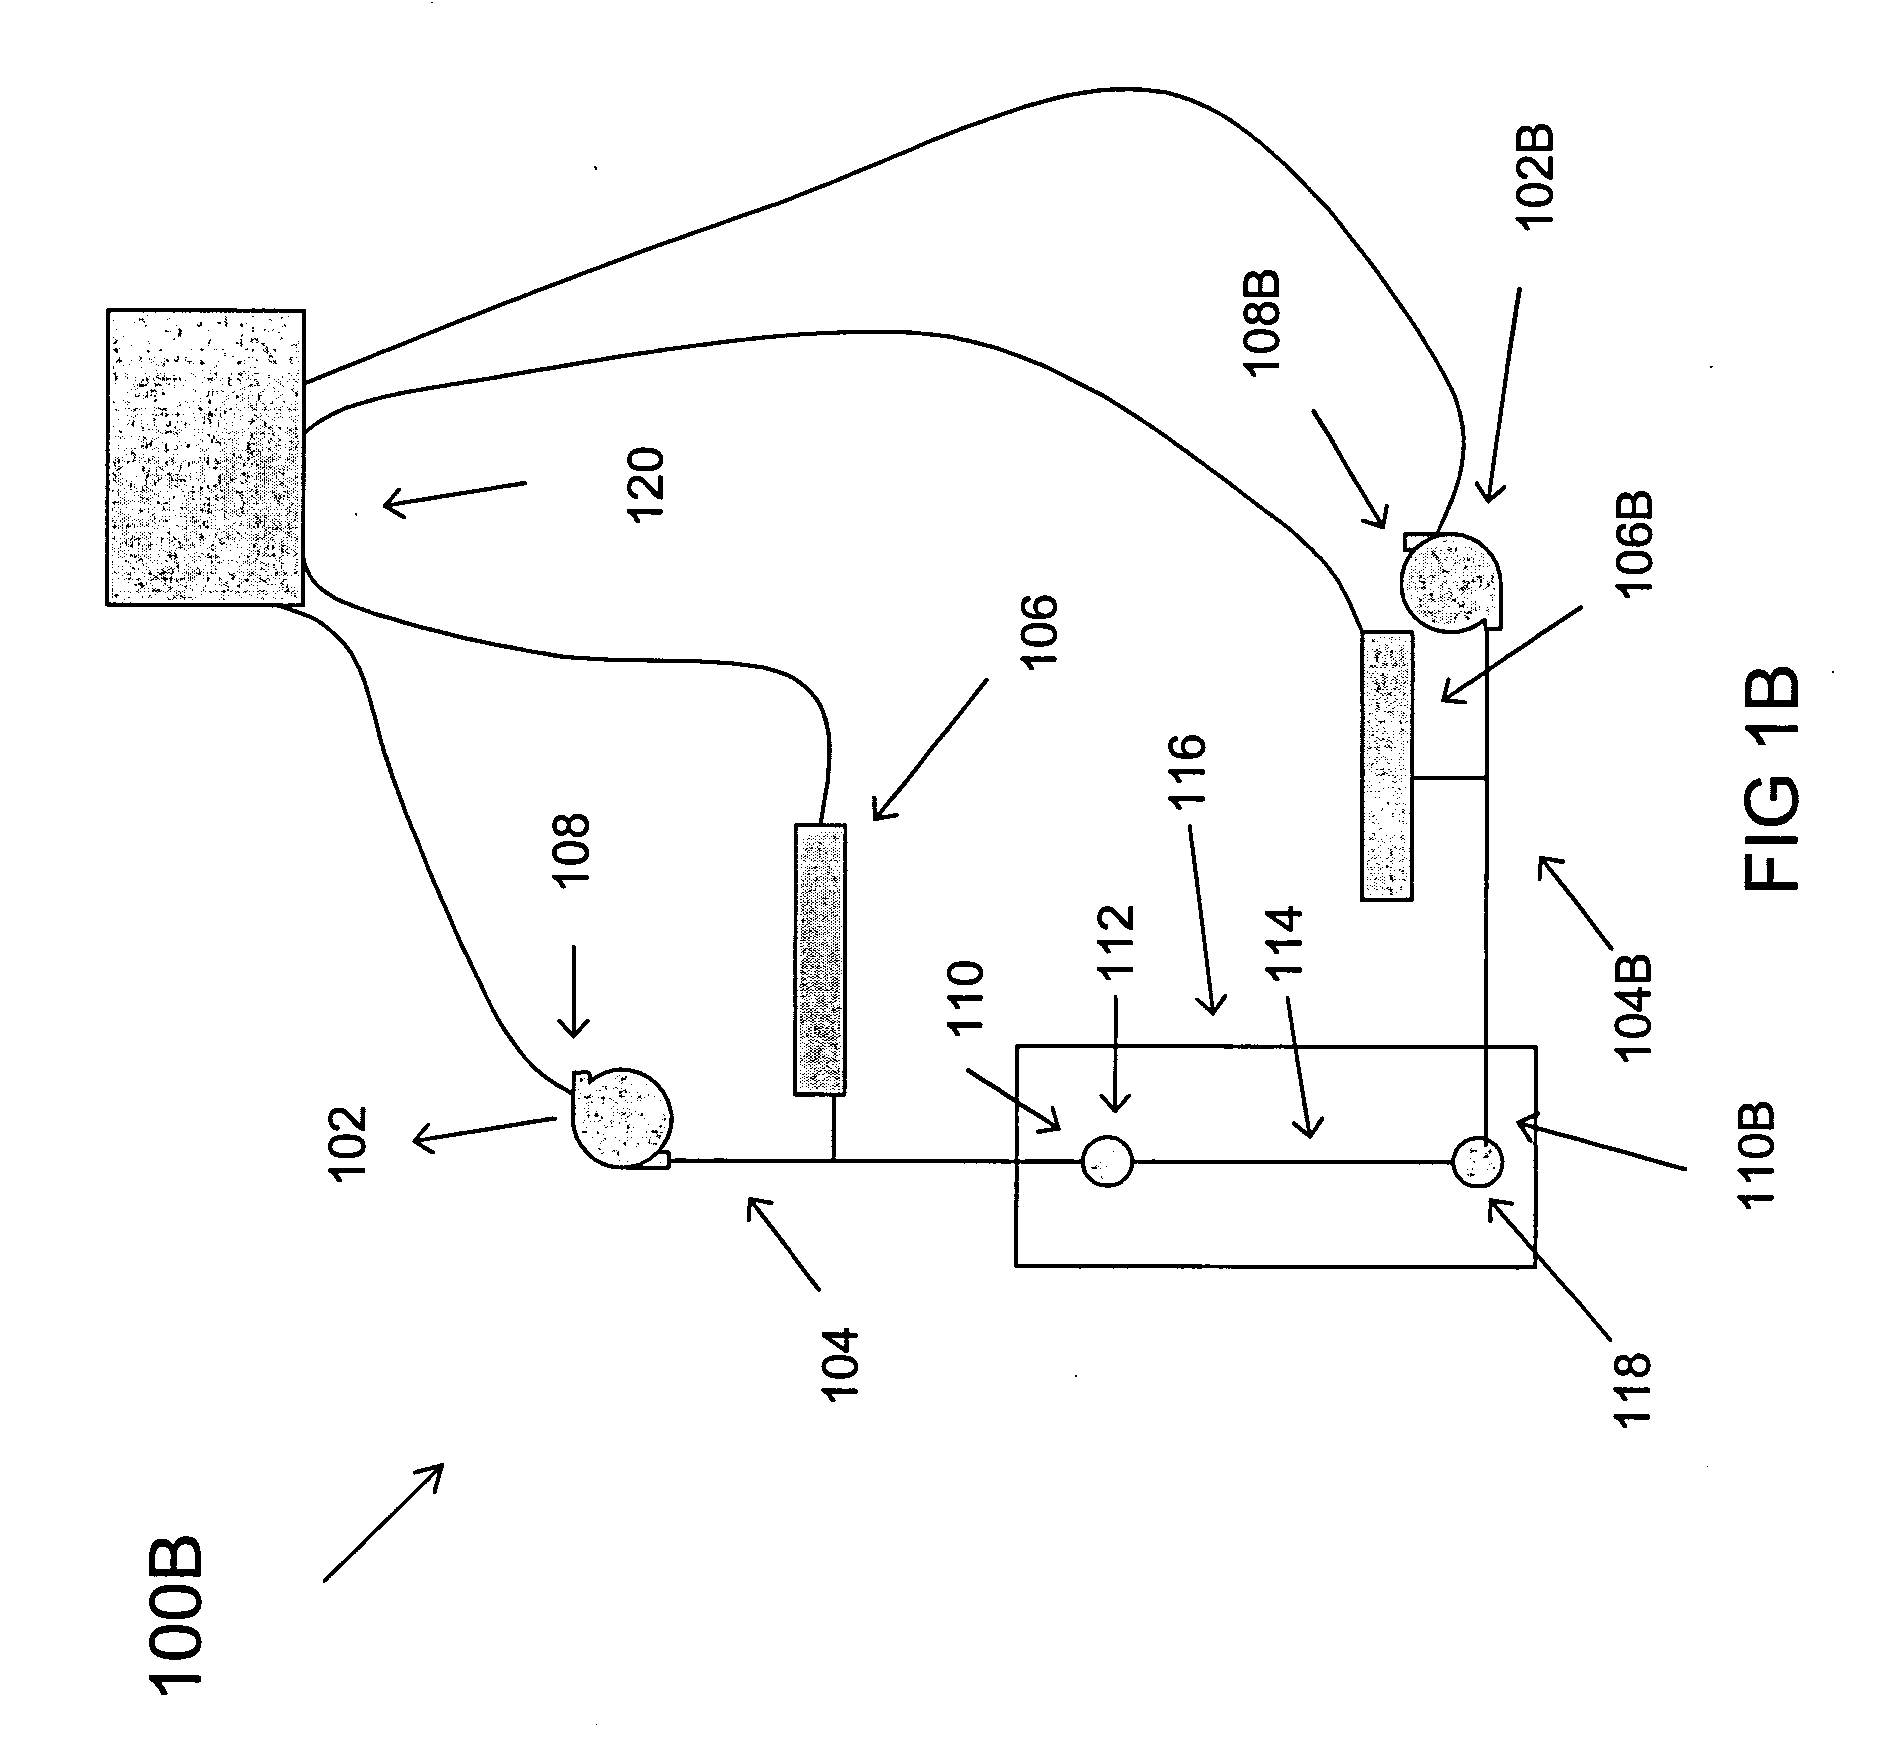 Method and apparatus for controlling microfluidic flow